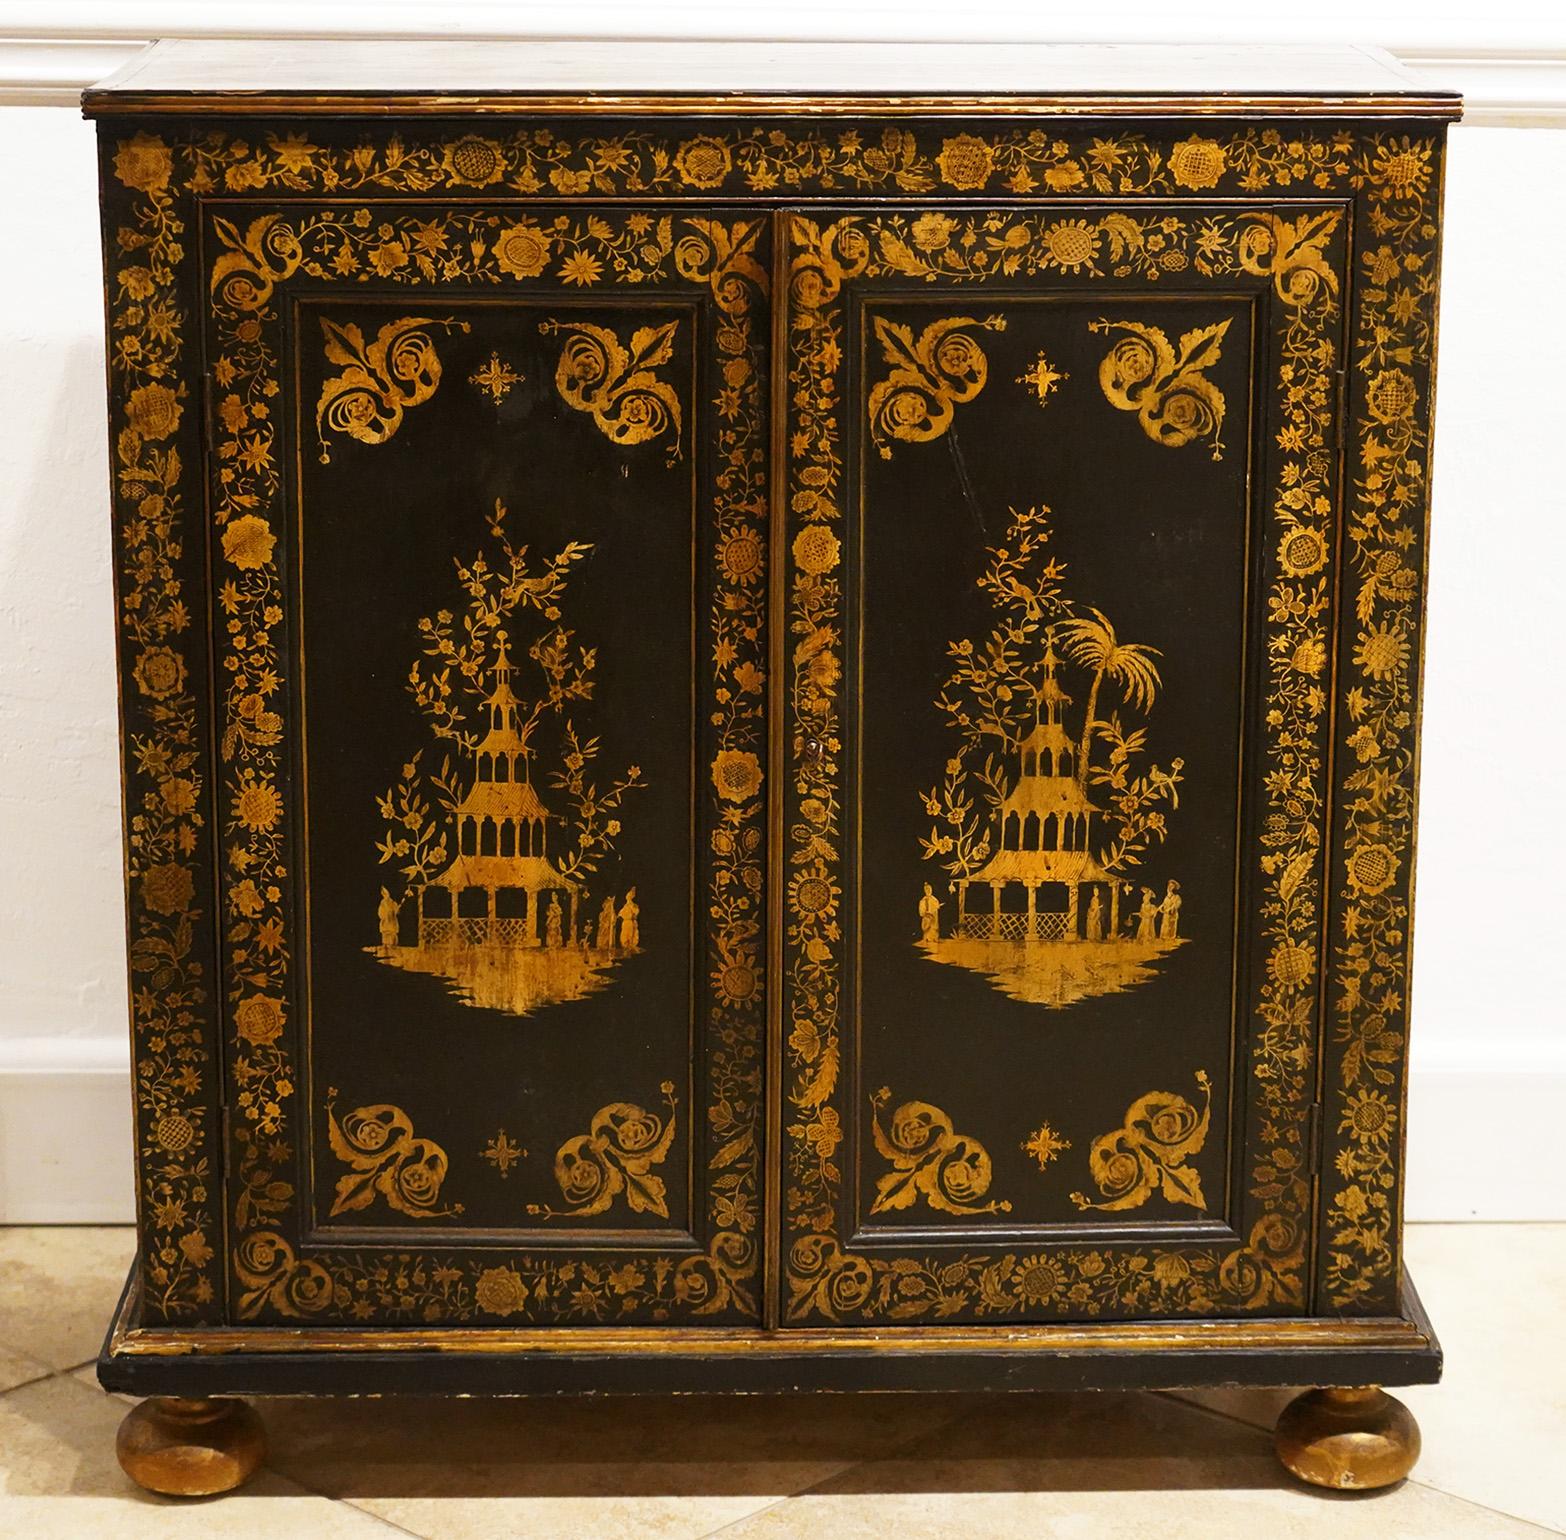 This fine Georgian chinoiserie gilt penwork side cabinet features a top with two pagoda landscape motifs above two doors opening up to a shelved interior and richly decorated with renderings of pagodas and people all surrounded by delicately painted